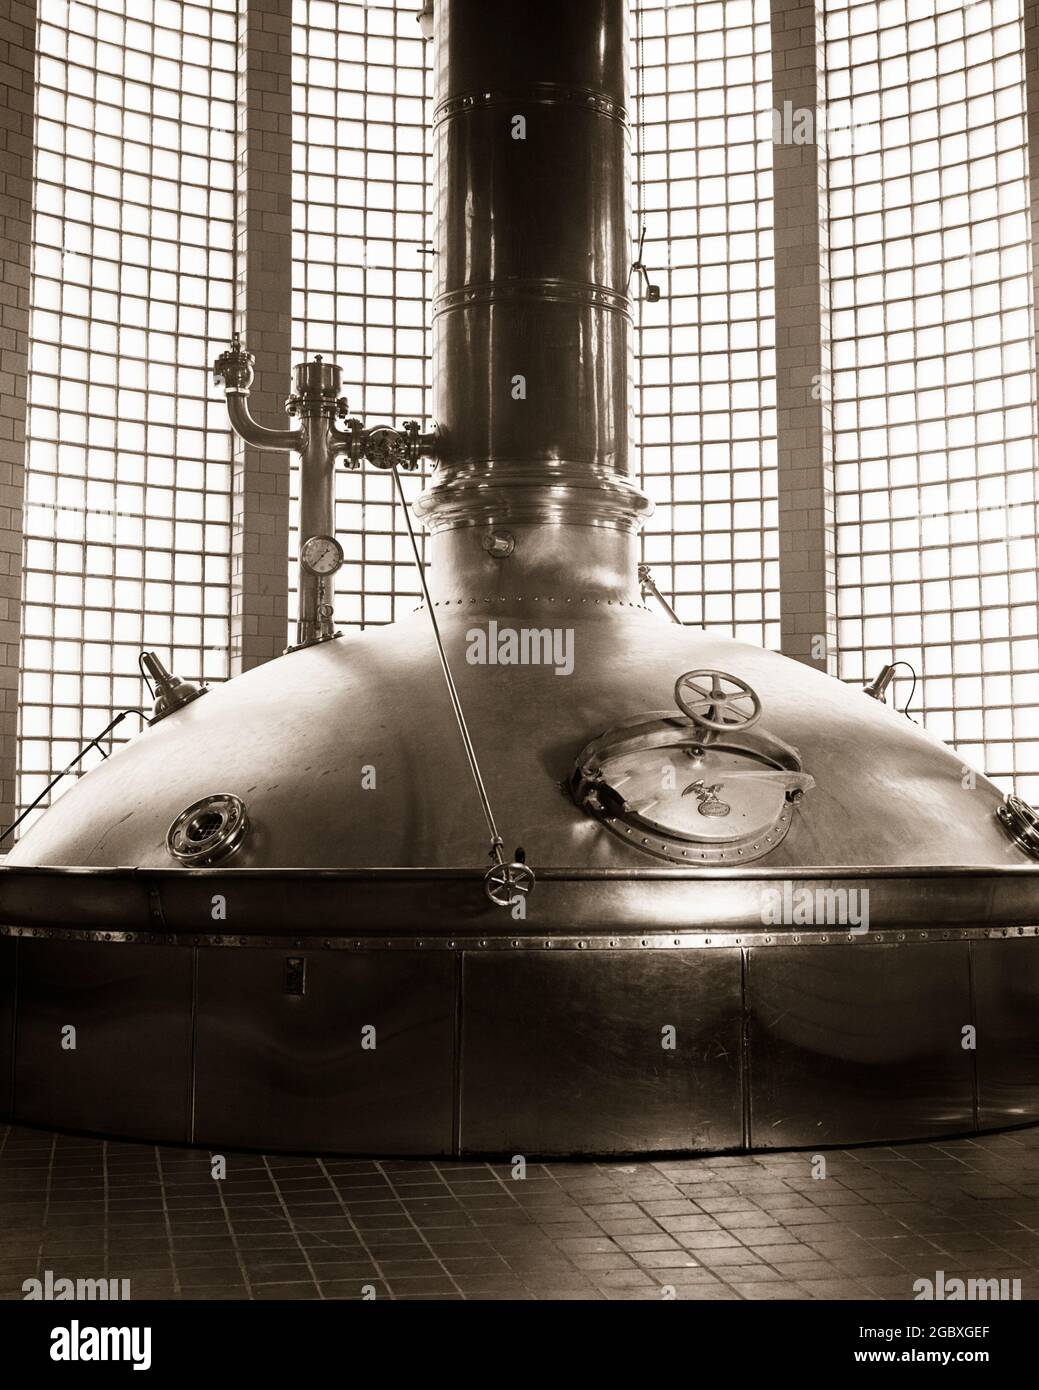 https://c8.alamy.com/comp/2GBXGEF/1930s-1940s-new-copper-pressure-brew-kettle-in-beer-brewery-pennsylvania-usa-i3404-har001-hars-old-fashioned-2GBXGEF.jpg